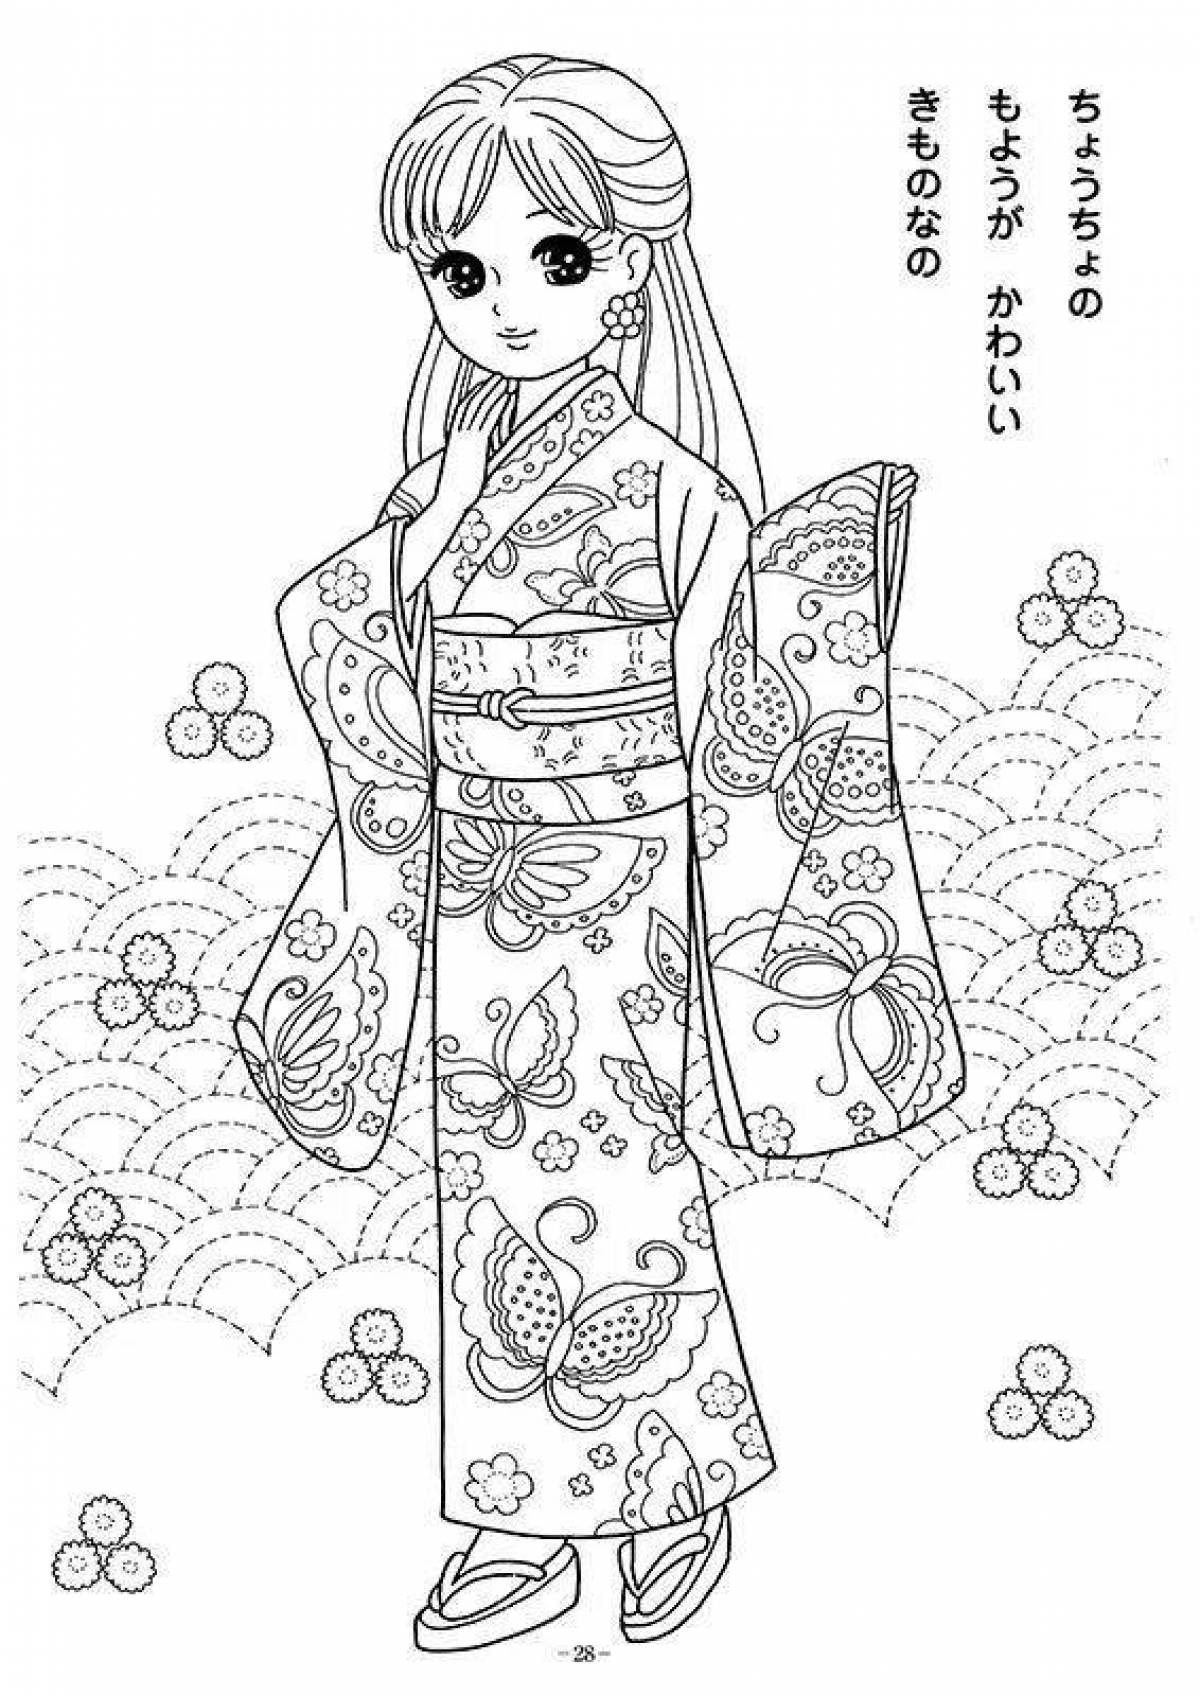 Creative japanese coloring book